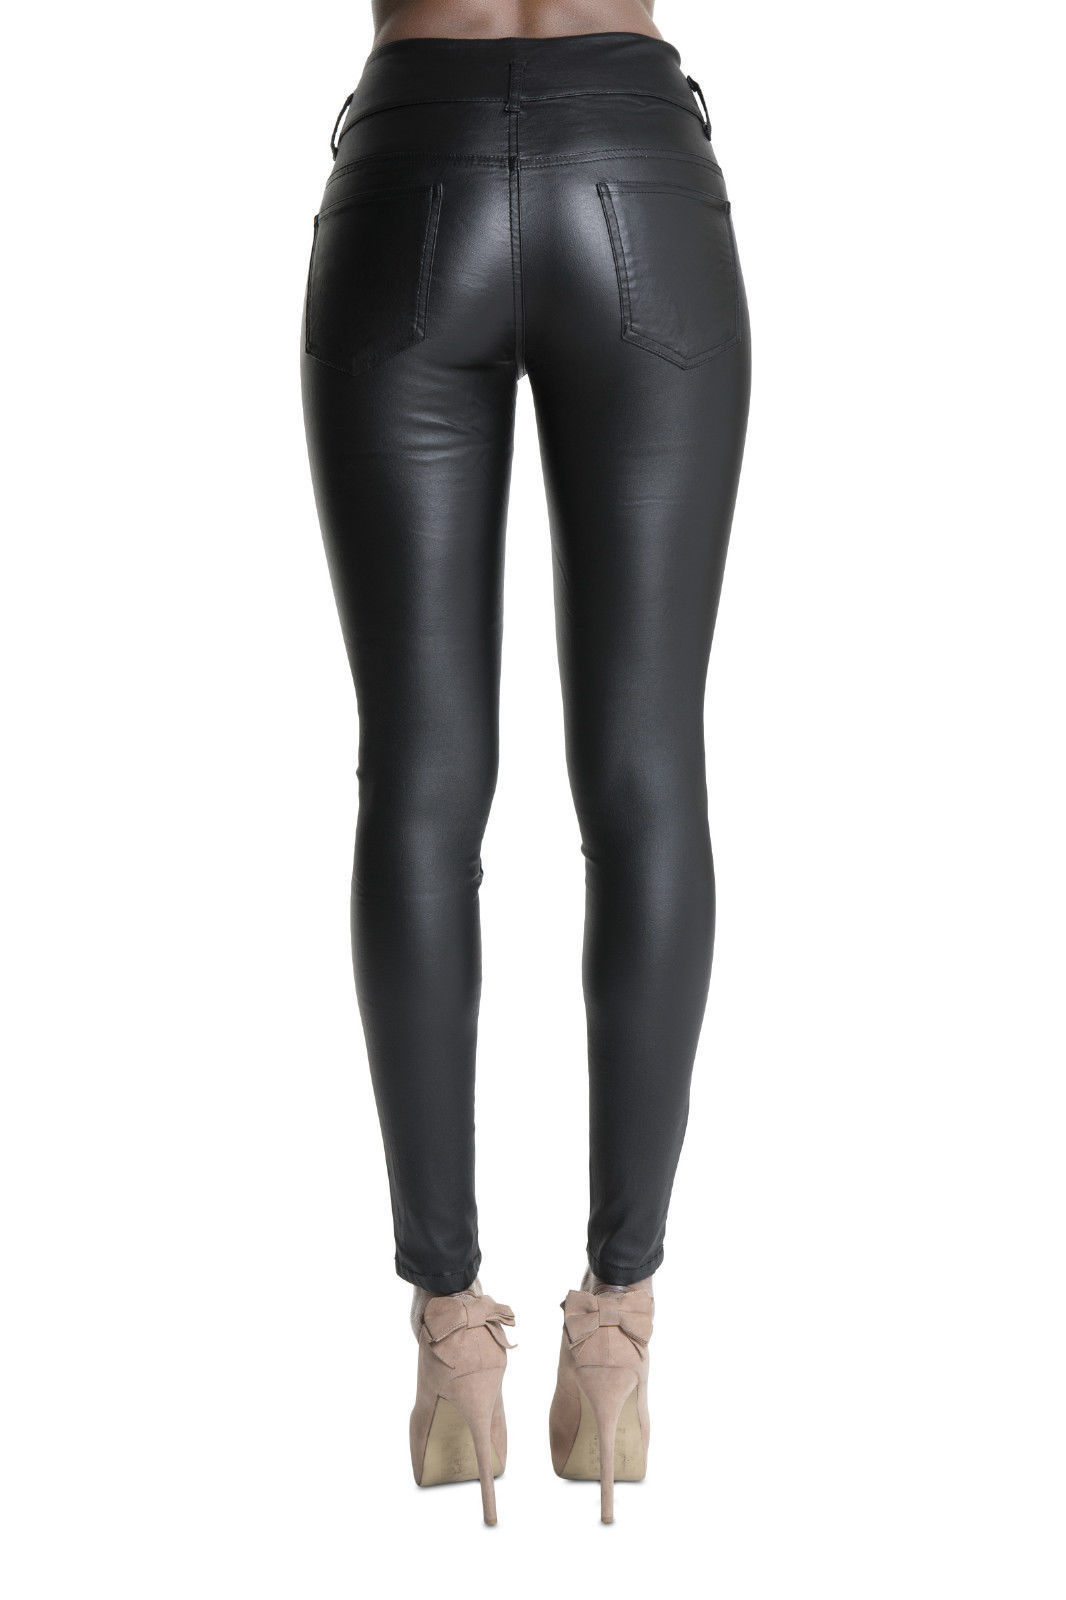 WOMEN HIGH WAIST BLACK LEATHER LOOK JEANS SLIM FIT TROUSERS SIZE 6 8 10 ...